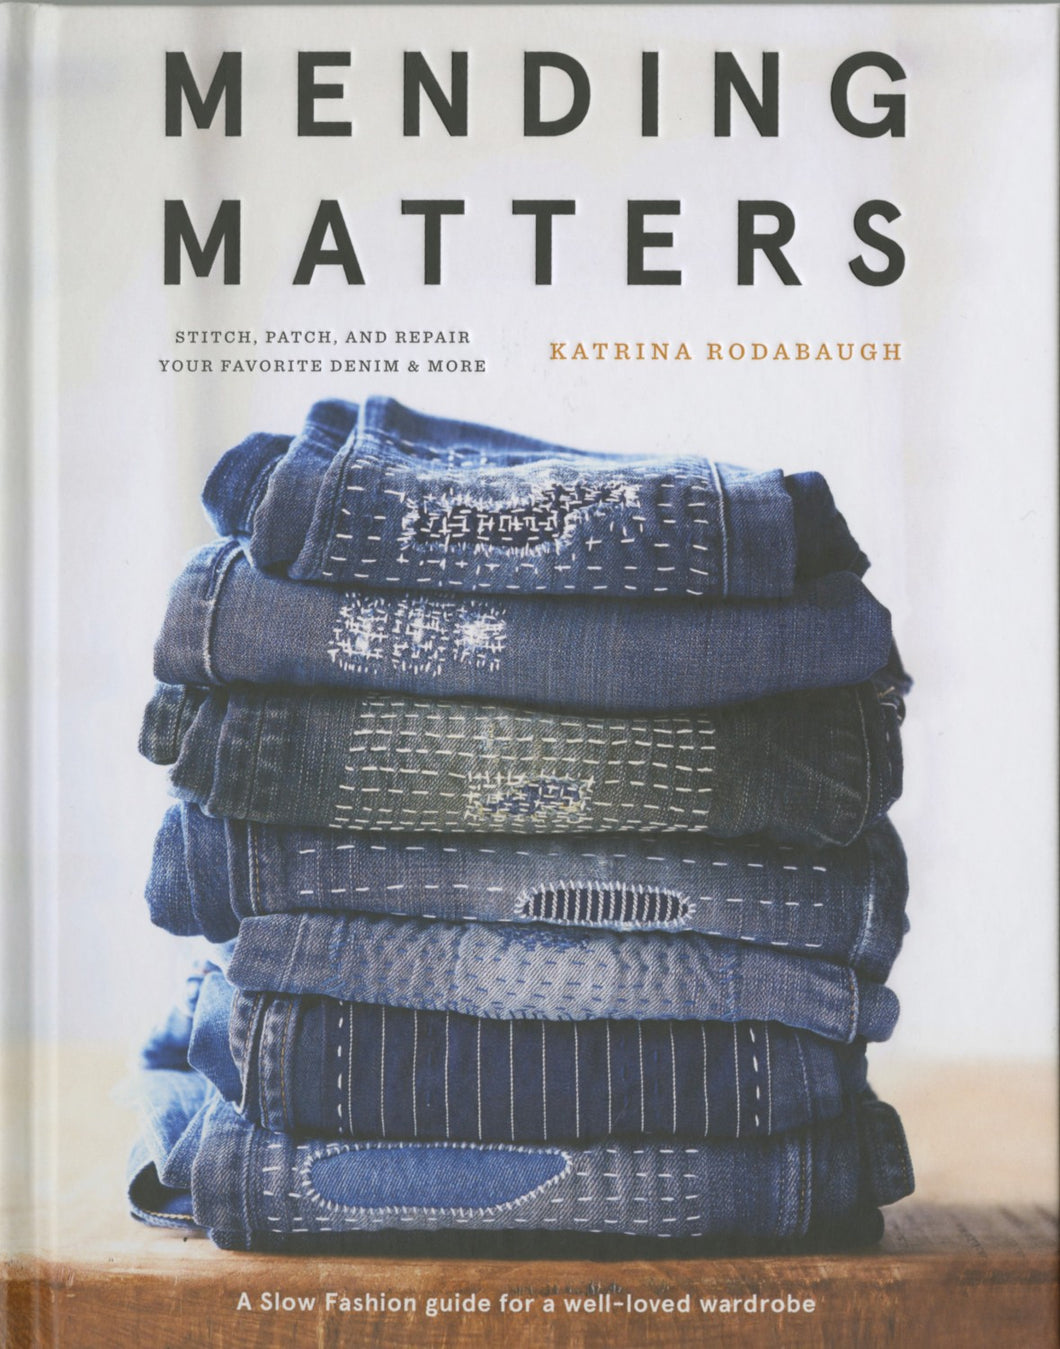 Mending Matters: Stitch Patch and Repair Your Favorite Denim and More by Katrina Rodabaugh